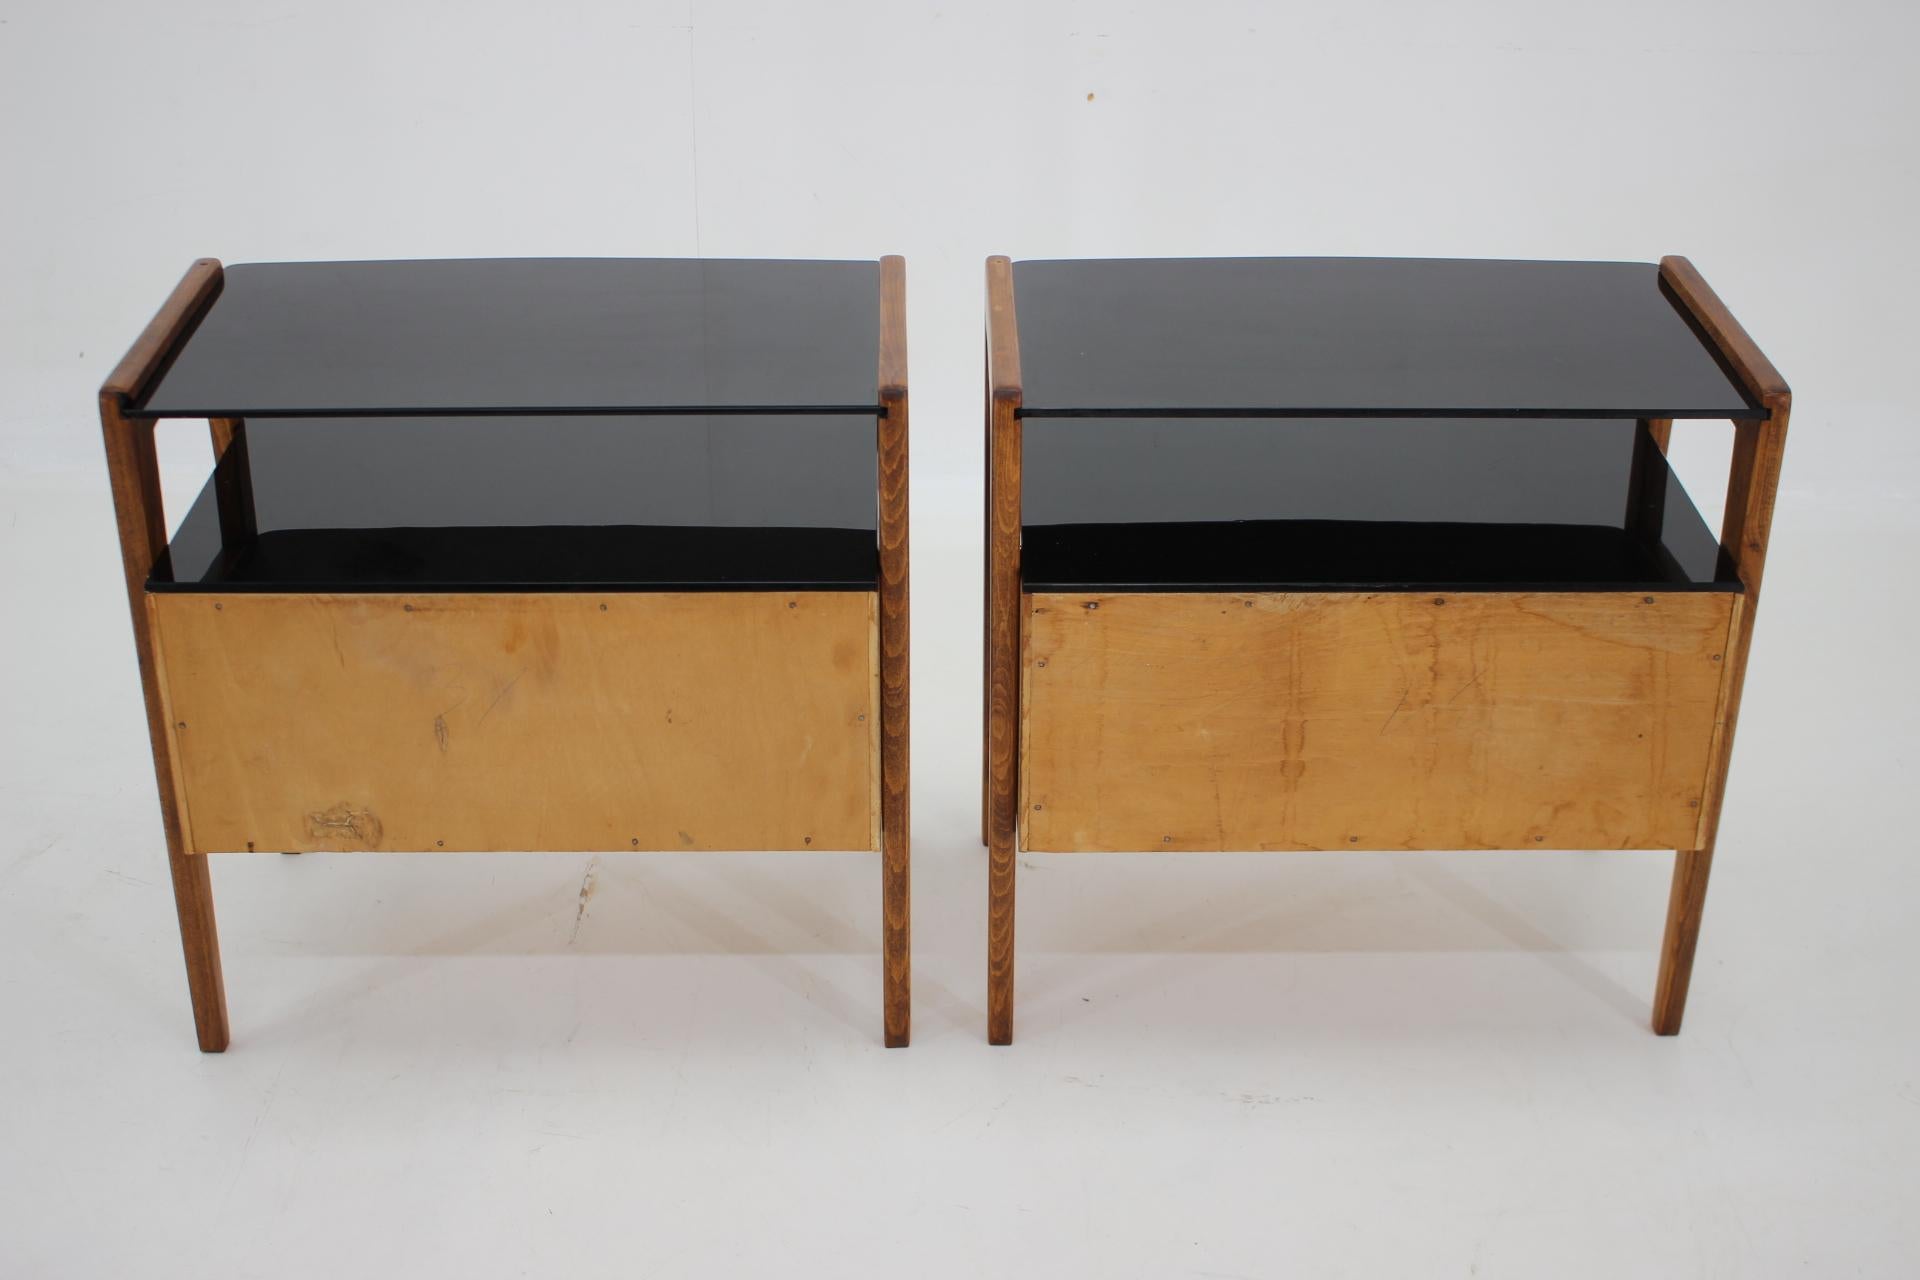 1960s Pair of Restored Bedside Tables, Czechoslovakia For Sale 4